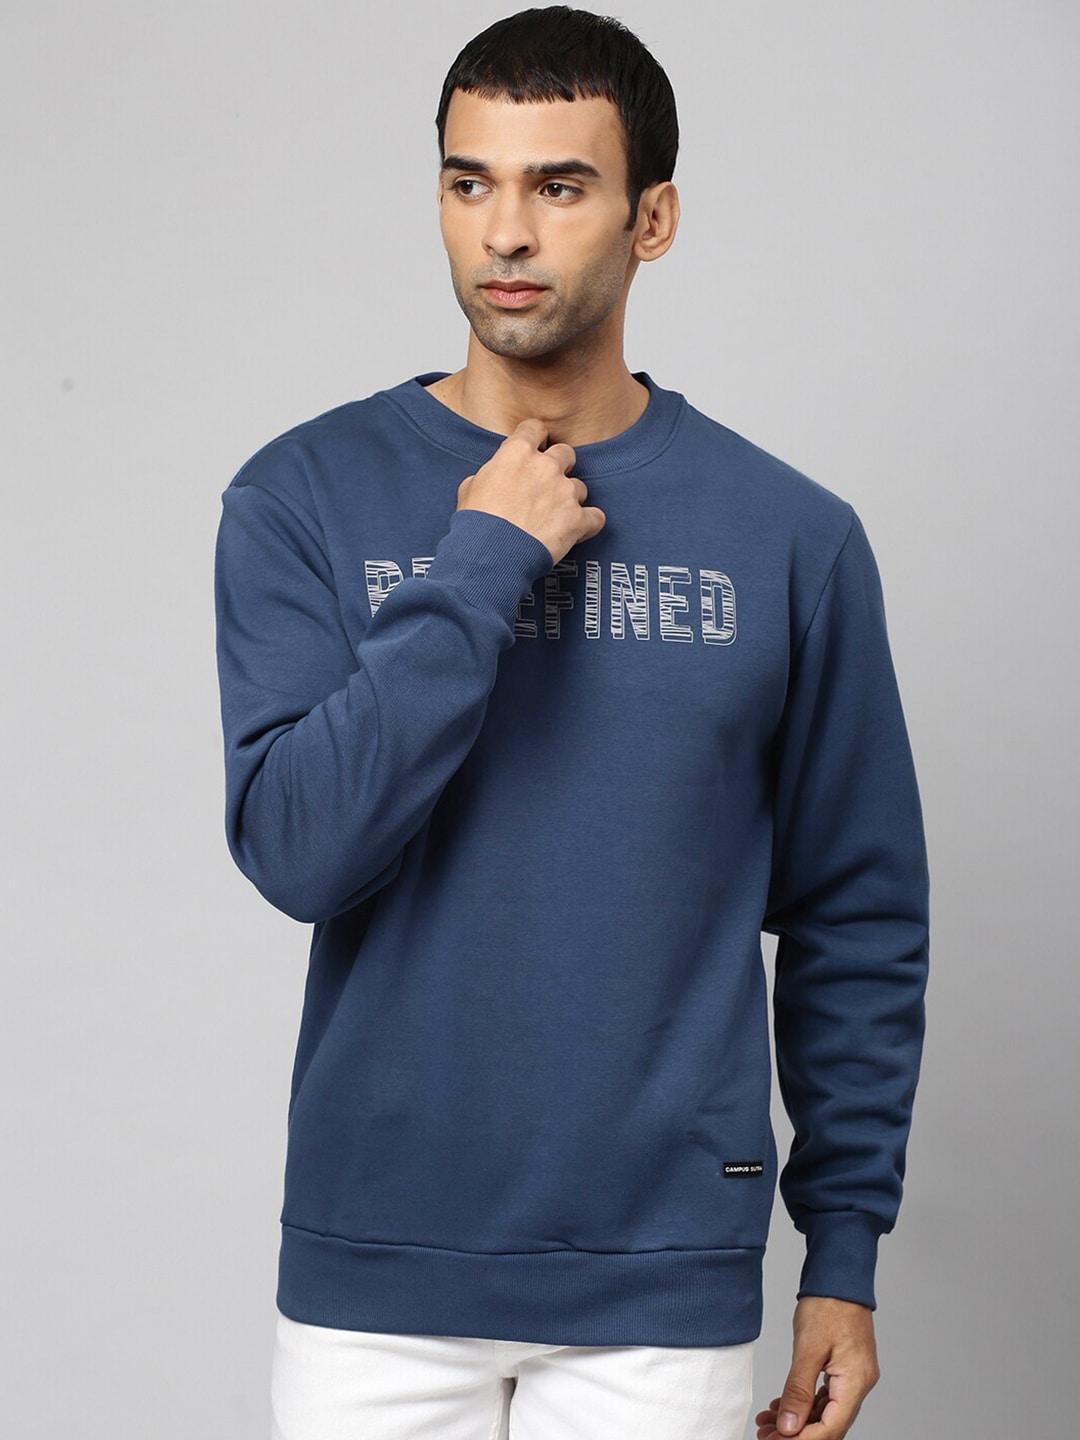 campus sutra men blue & white typography printed pullover